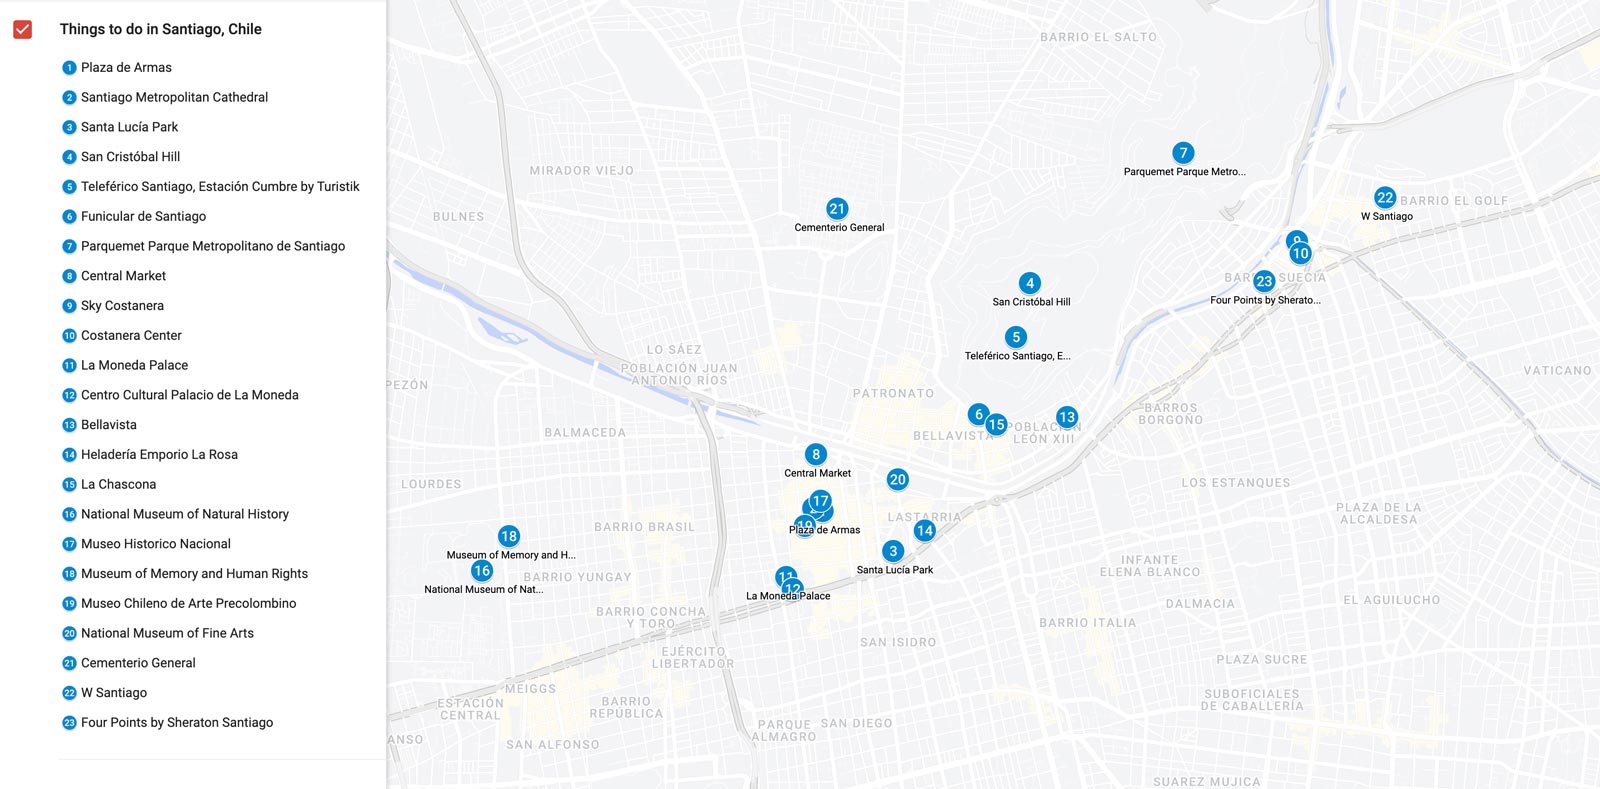 map of best things to do in santiago chile